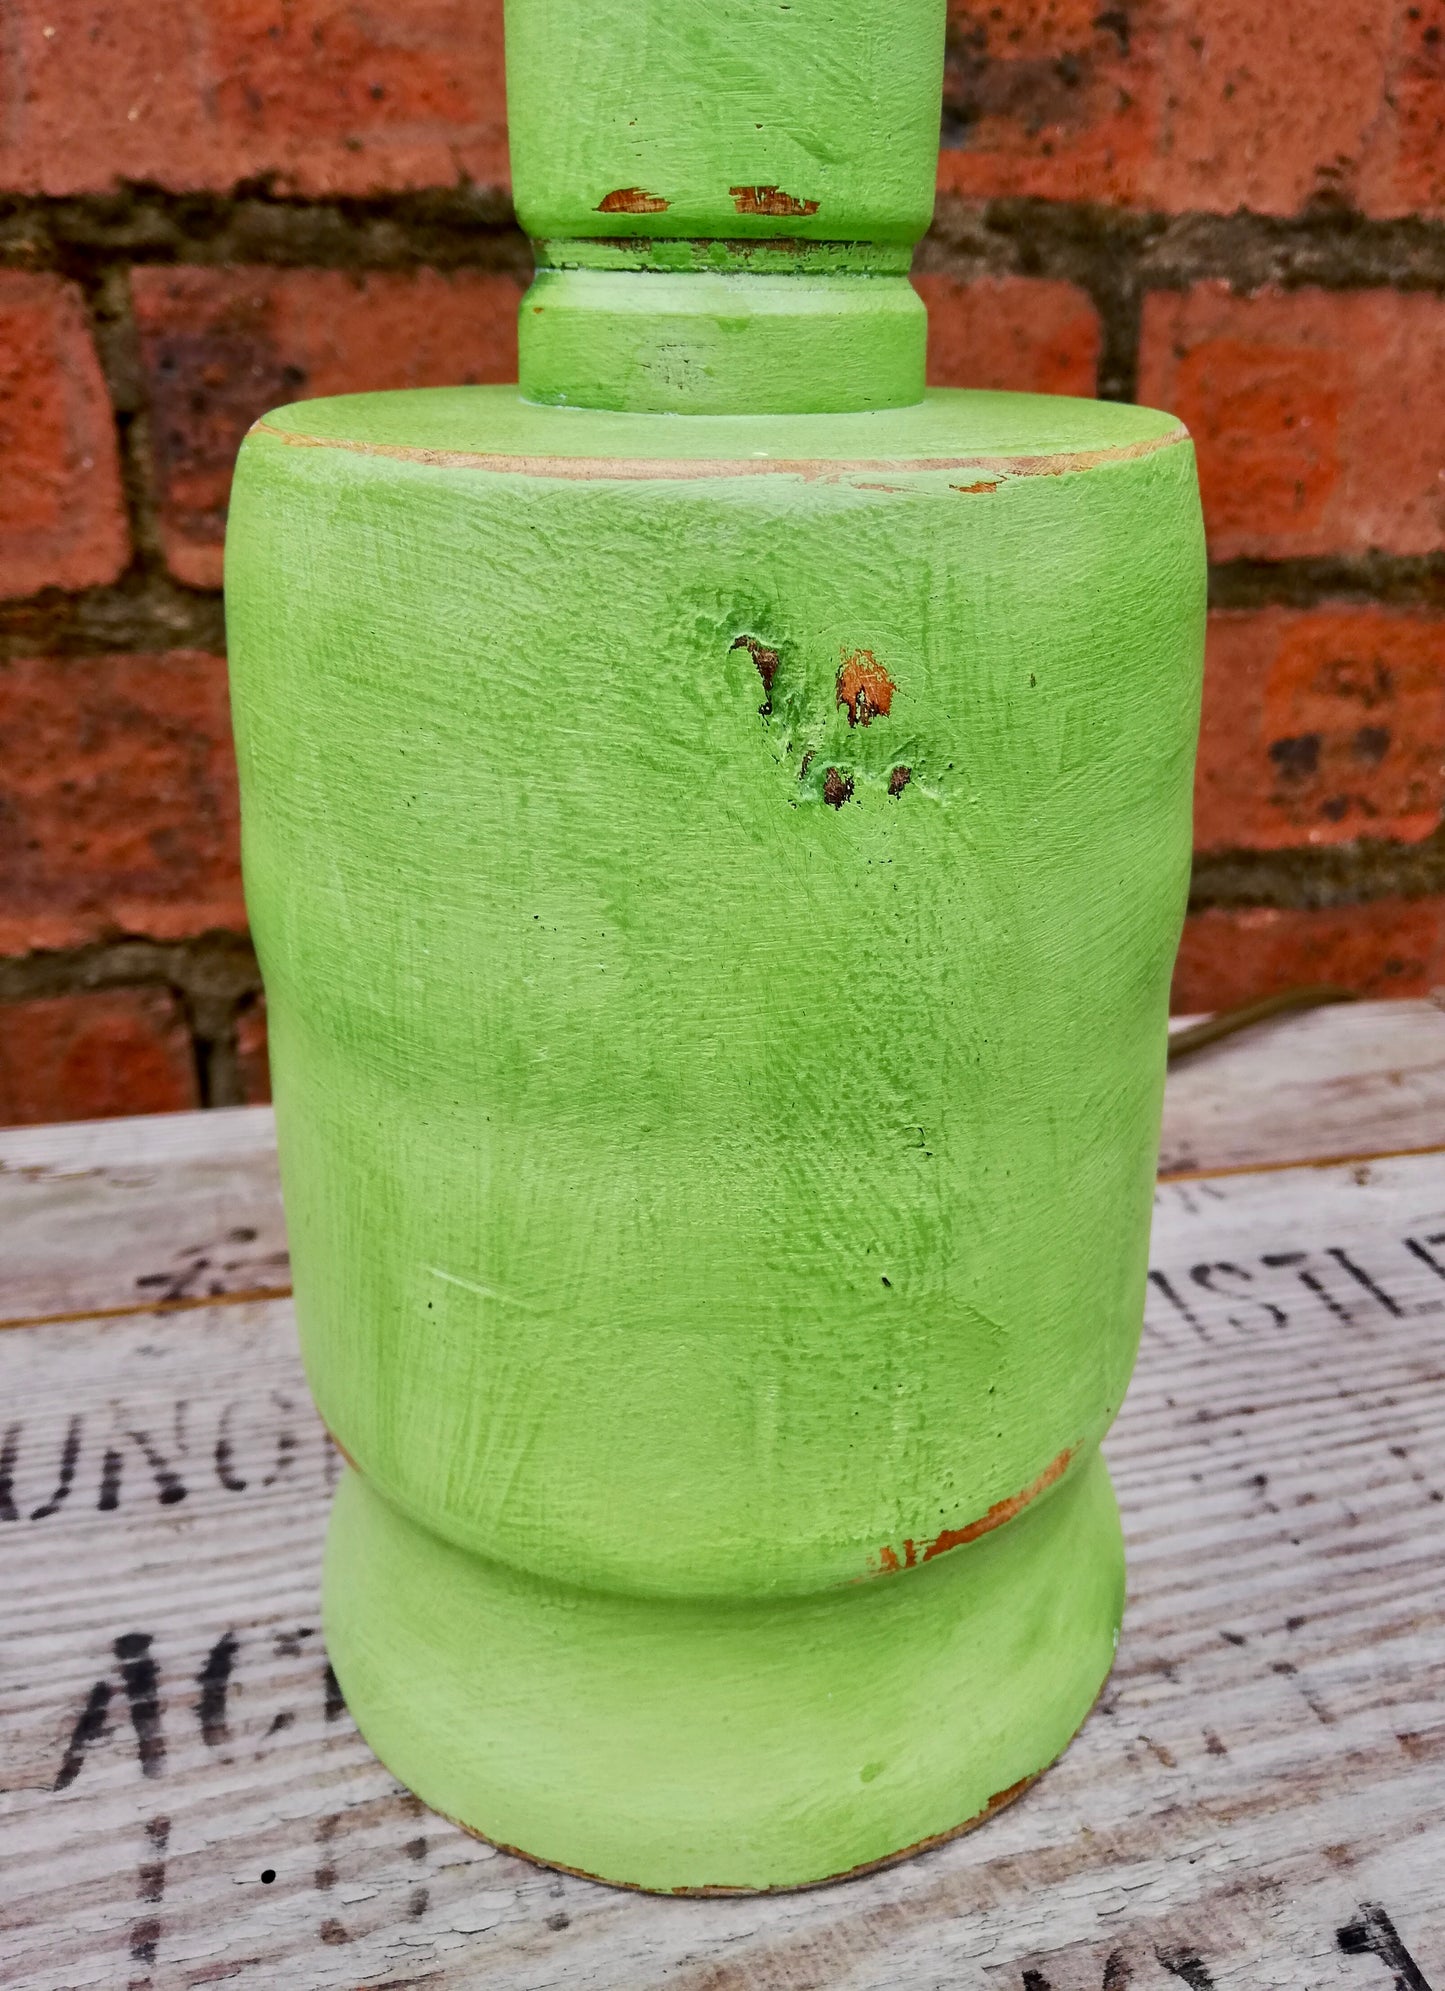 Lovely vintage wooden lamp base painted a bright spring green